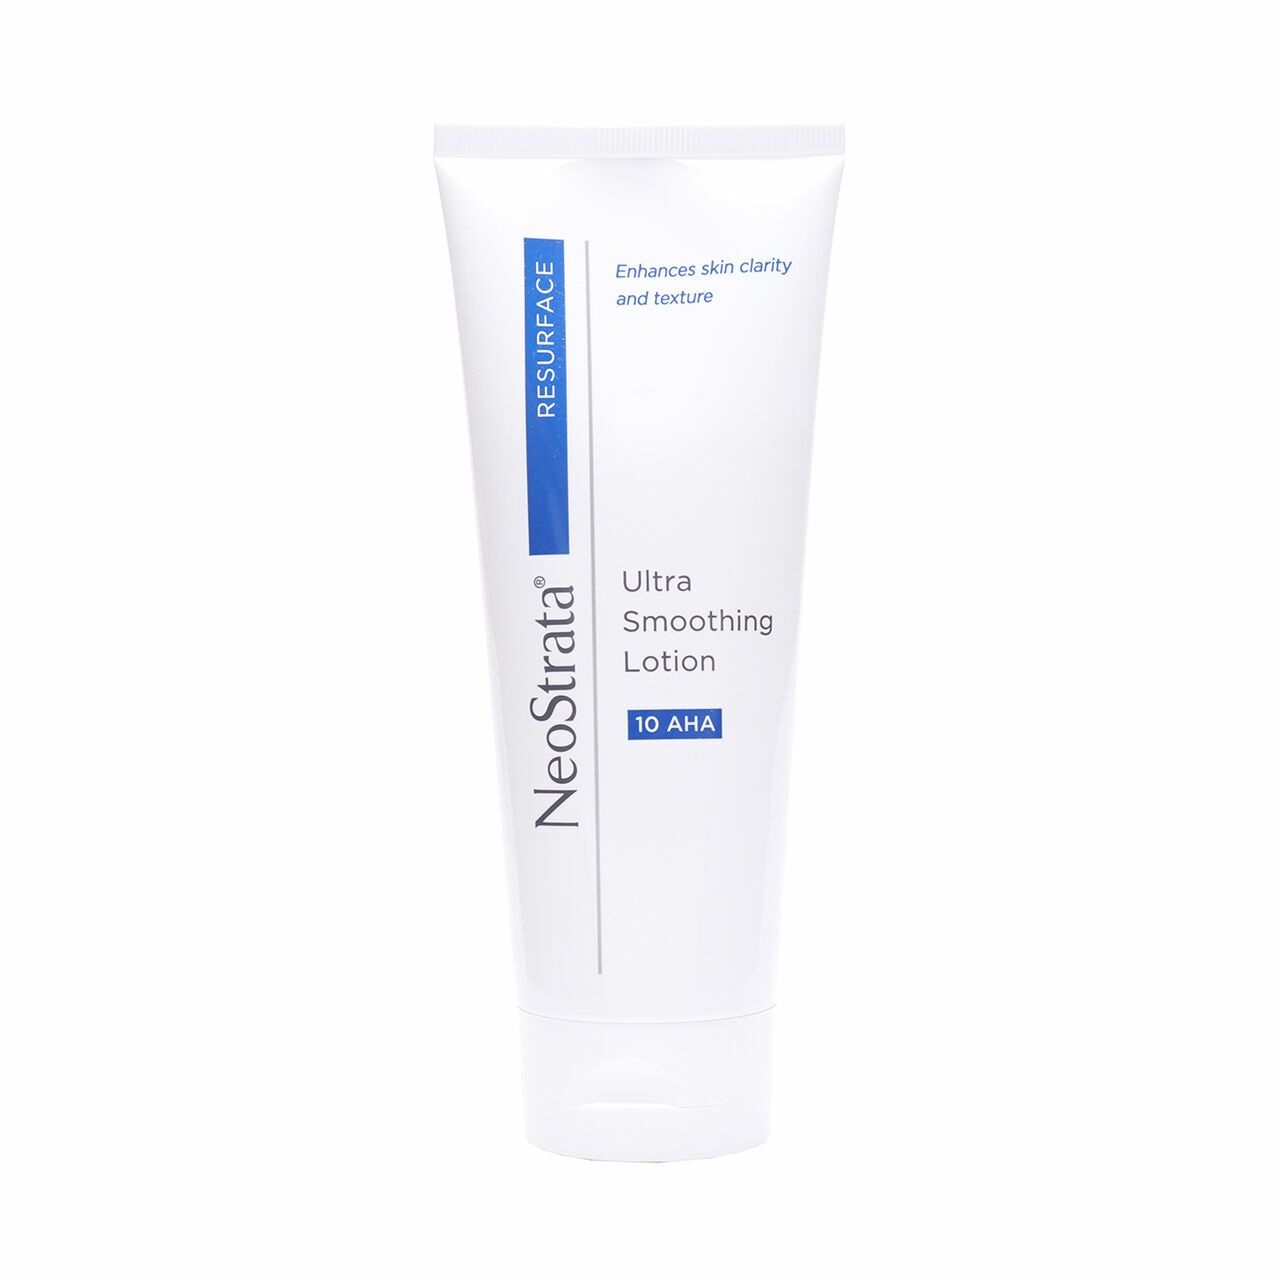 NeoStrata Ultra Smoothing Lotion 10 AHA Skin Care